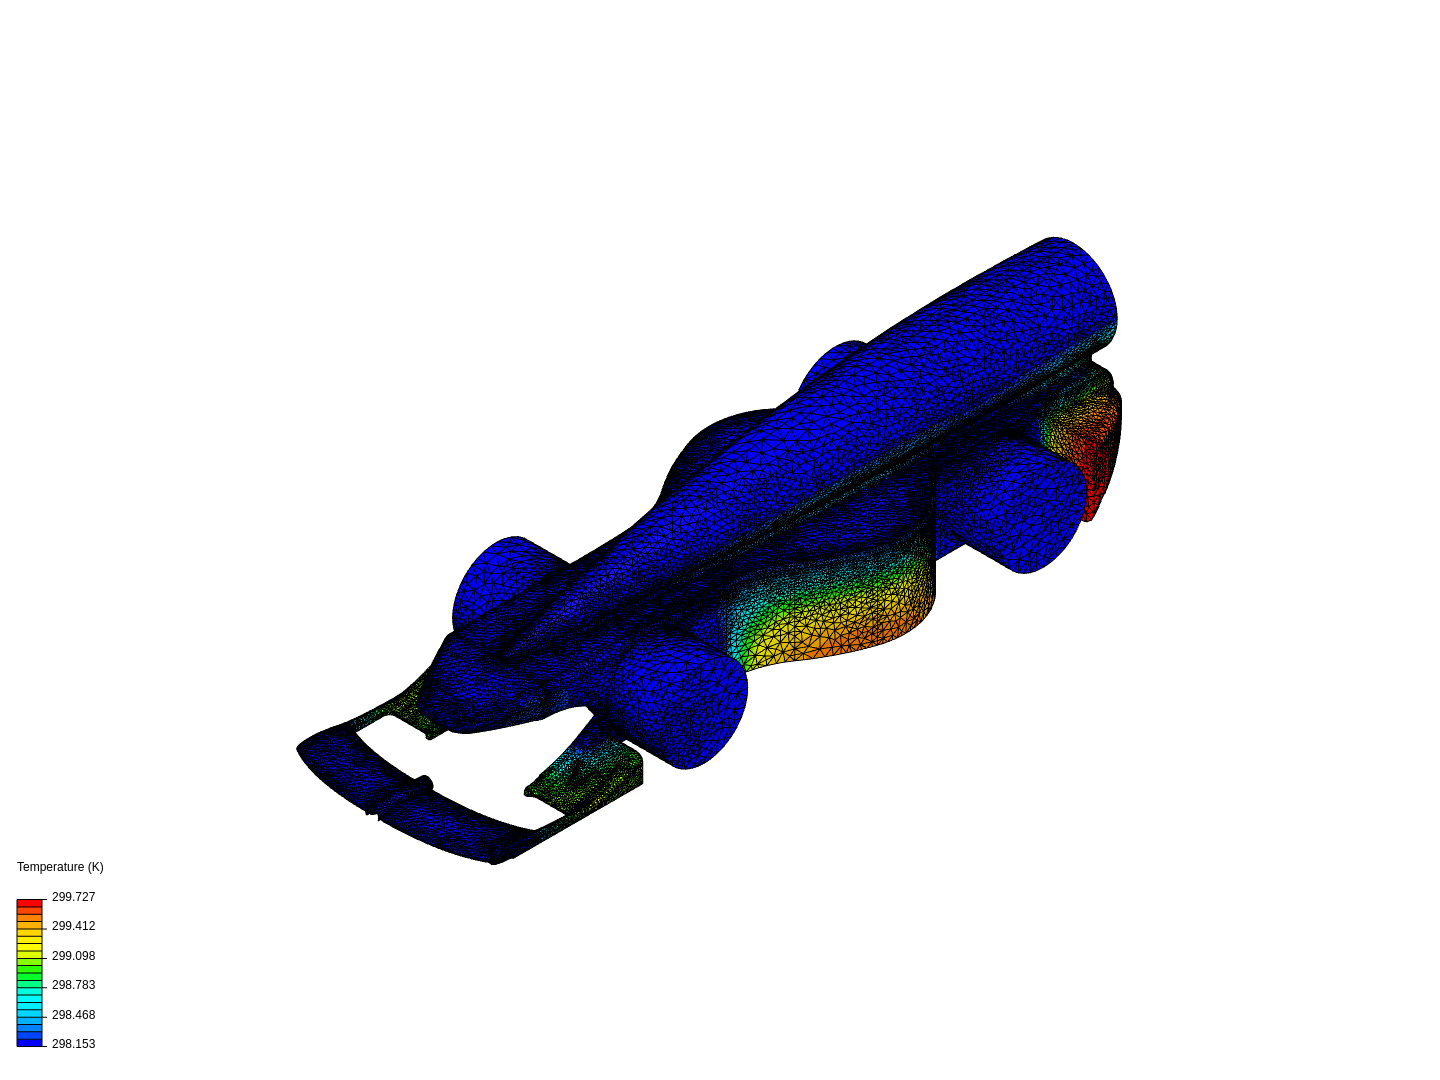 GM4 von mises stress and displacement image